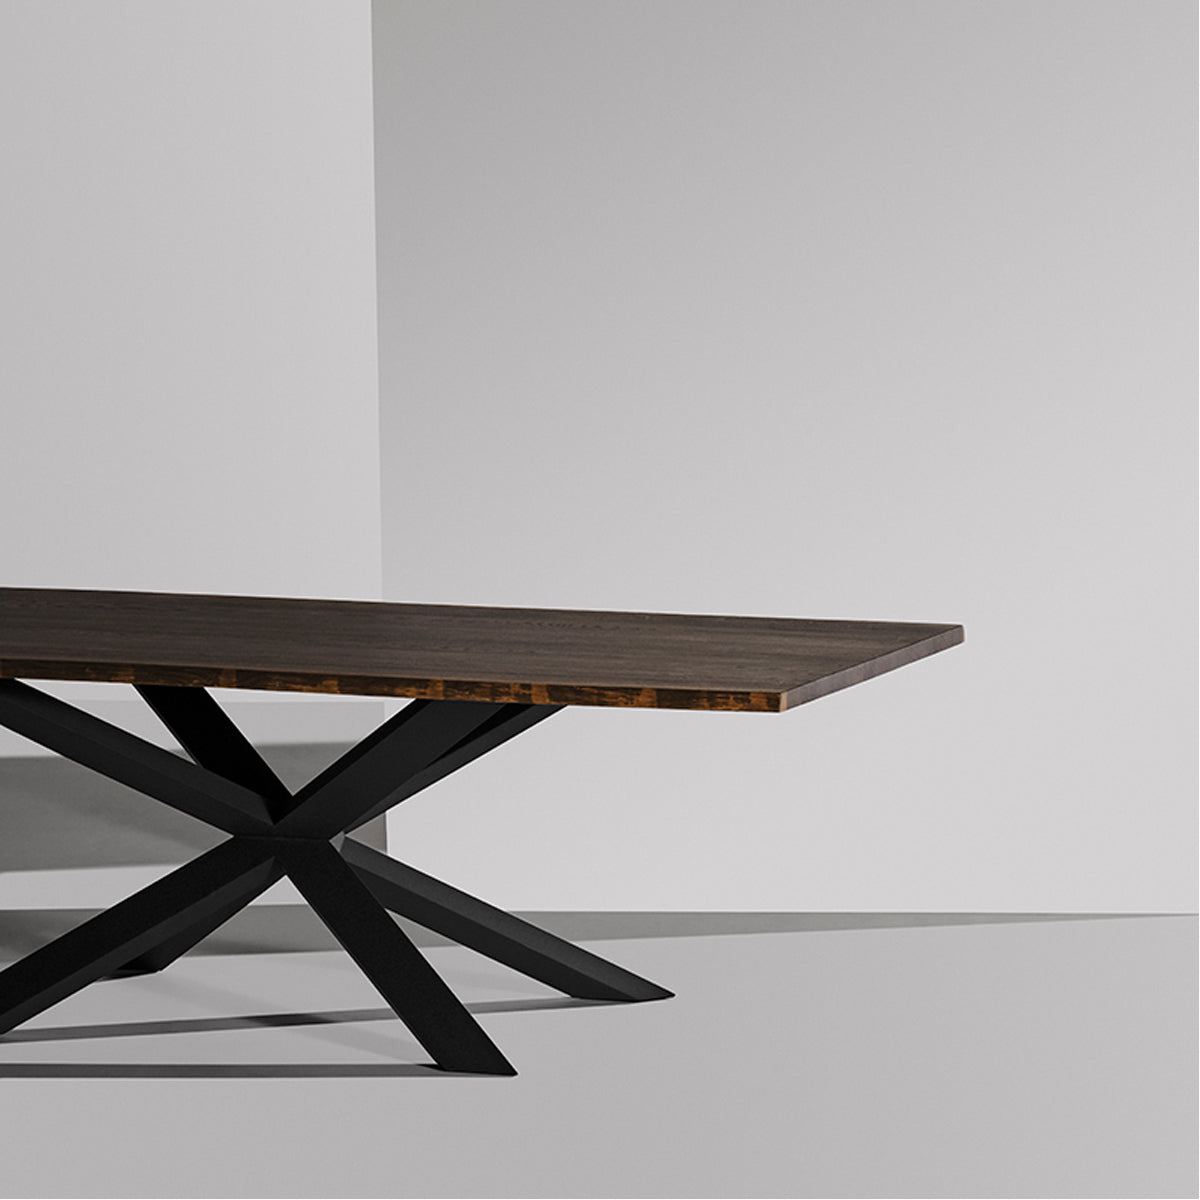 Nuevo Living Couture Wood Dining Table - Matte Black Base